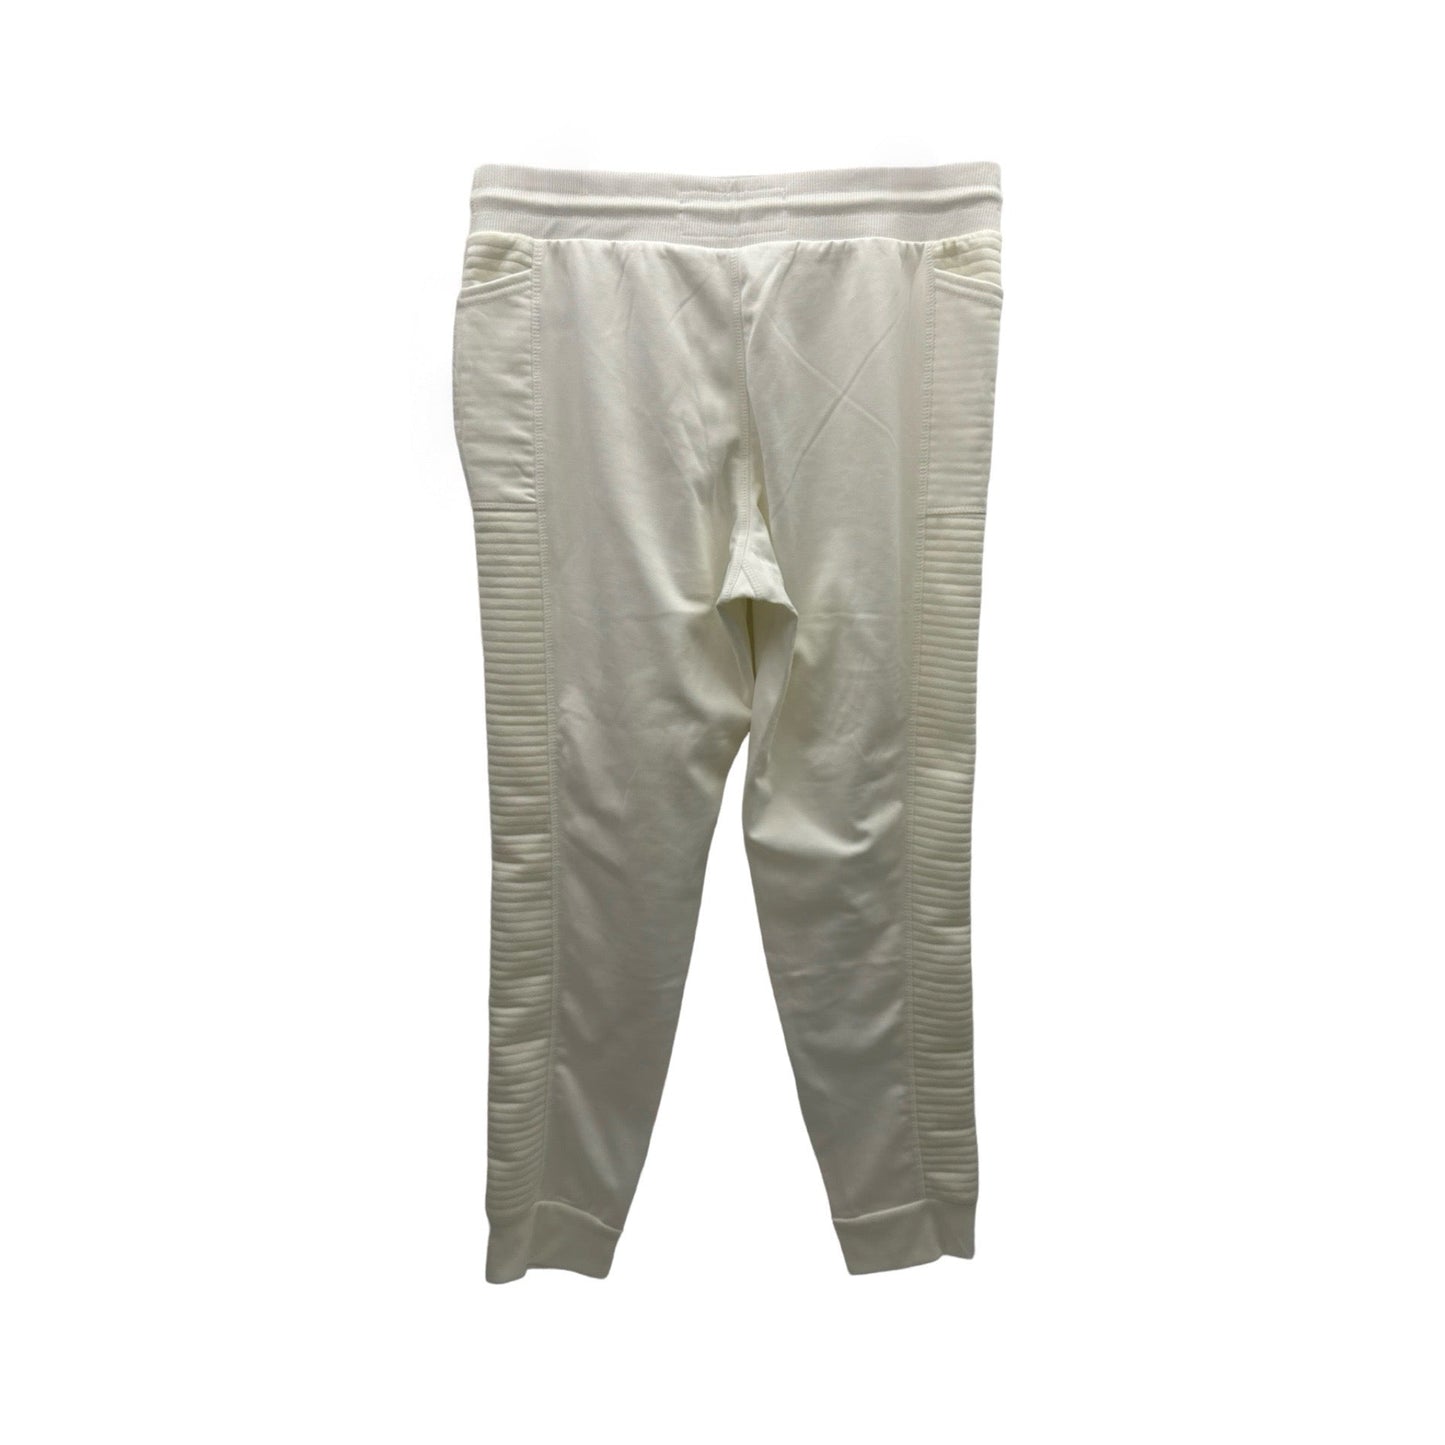 NWT White Lounge Pants By The Sweatshirt Project Size: L